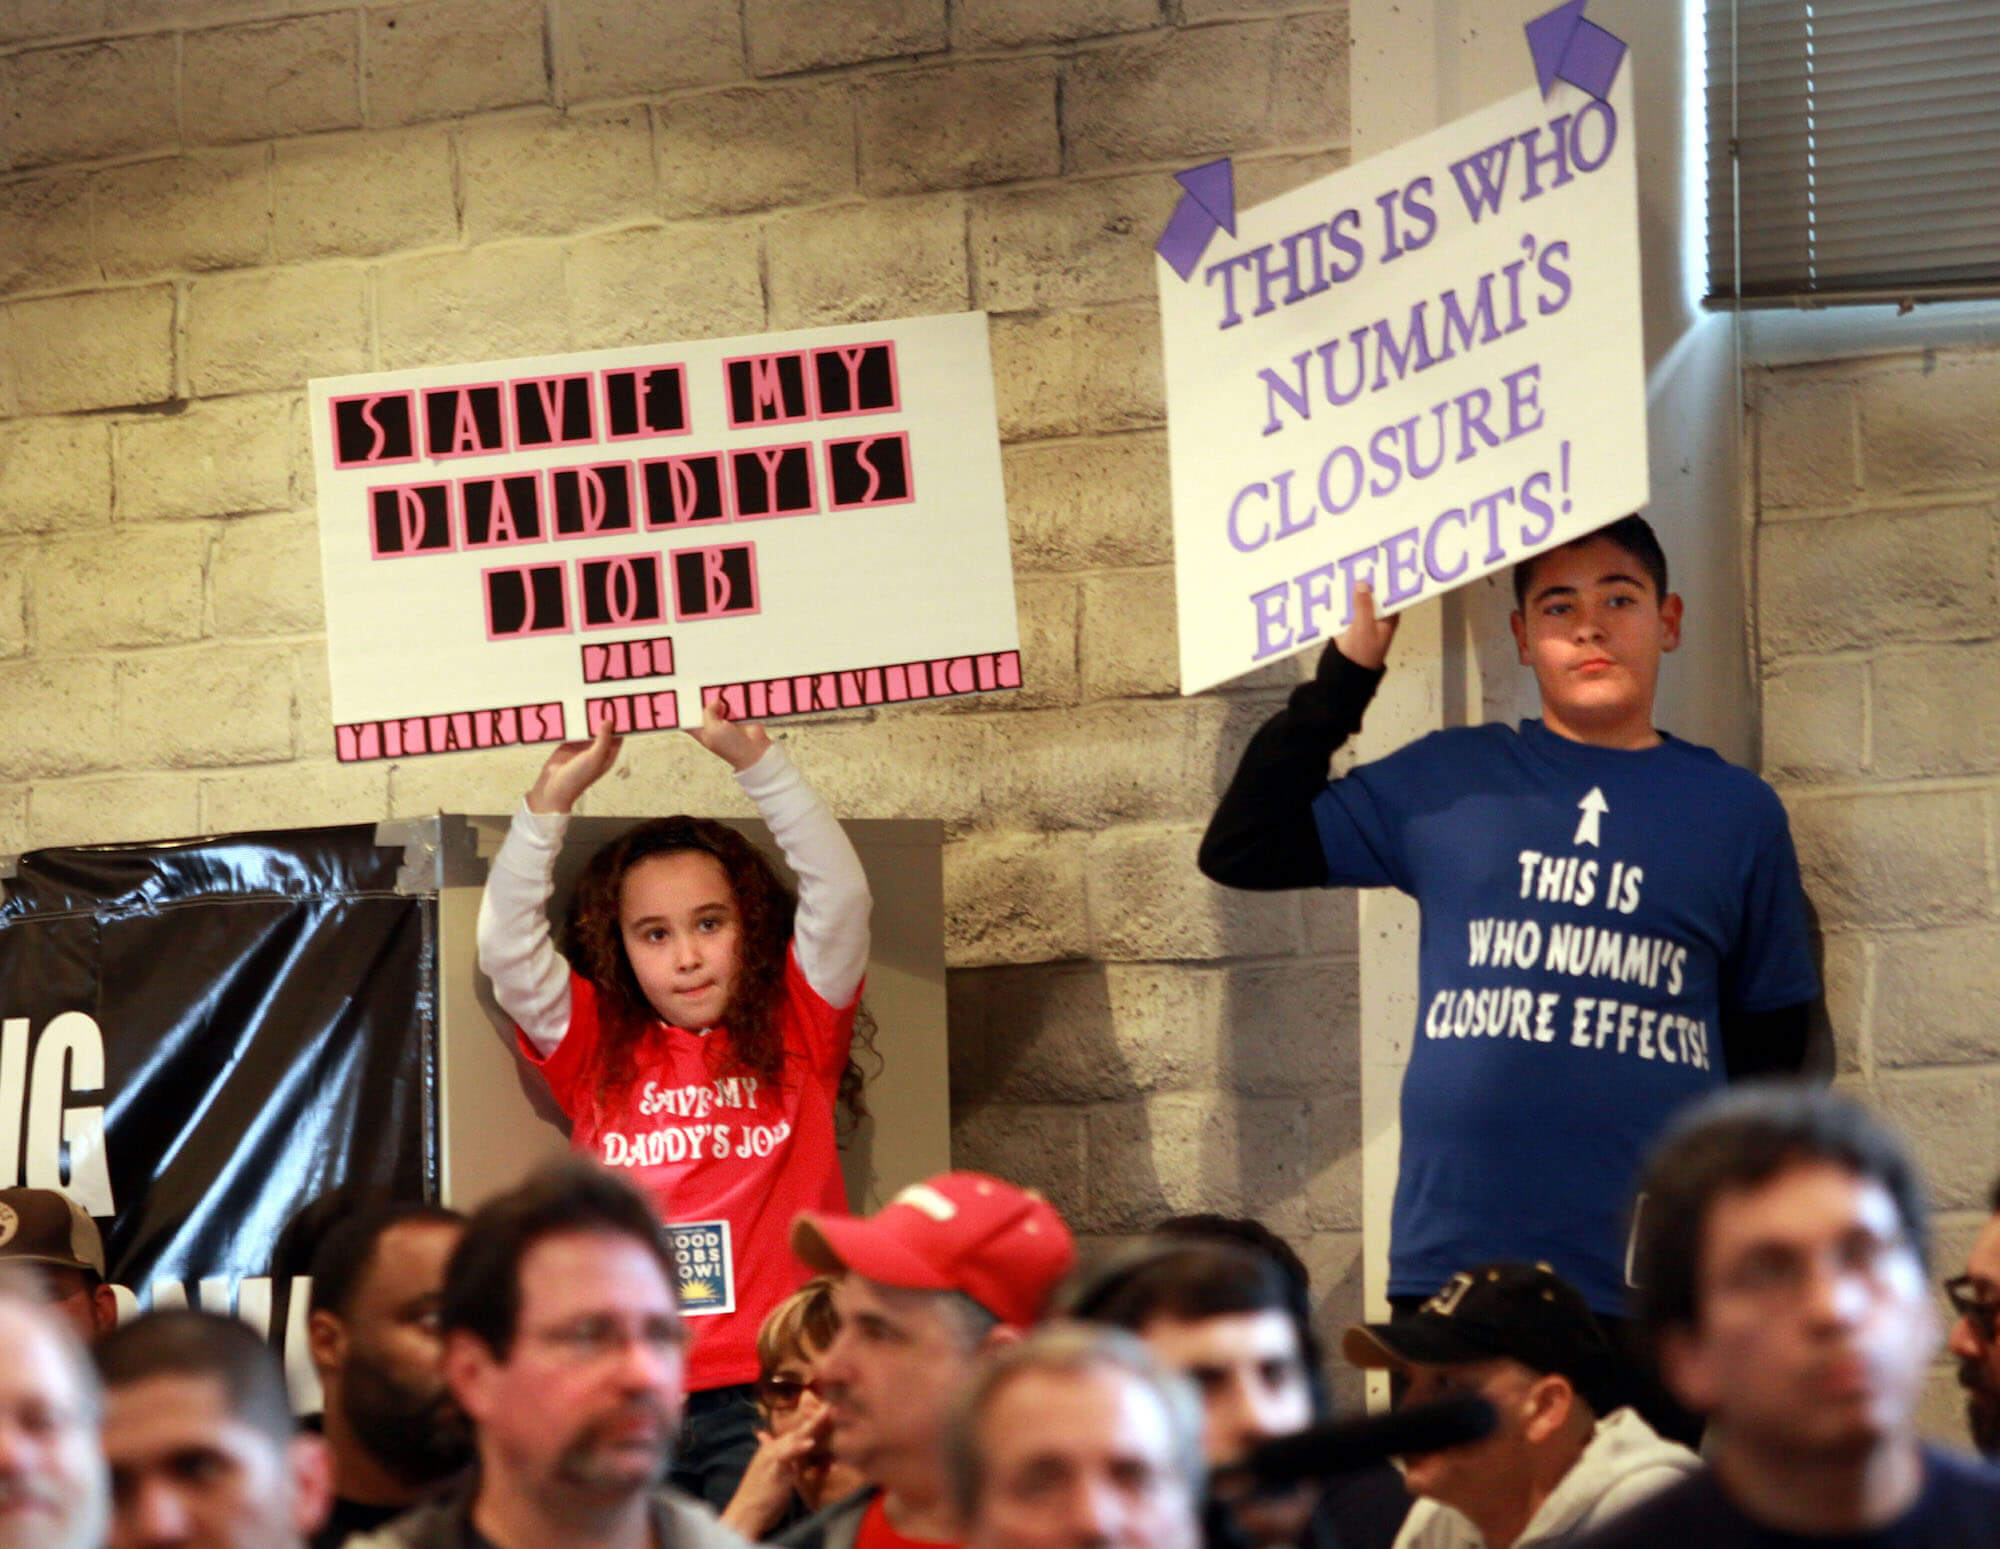 Marissa Perez and her brother Austin hold up signs for their father's job during a rally at the United Auto Workers Hall that hoped to persuade Toyota not to close its New United Motor Manufacturing Inc. automobile assembly plant, Friday, Feb. 12, 2010 in Fremont, Calif. (AP Photo/Dino Vournas)